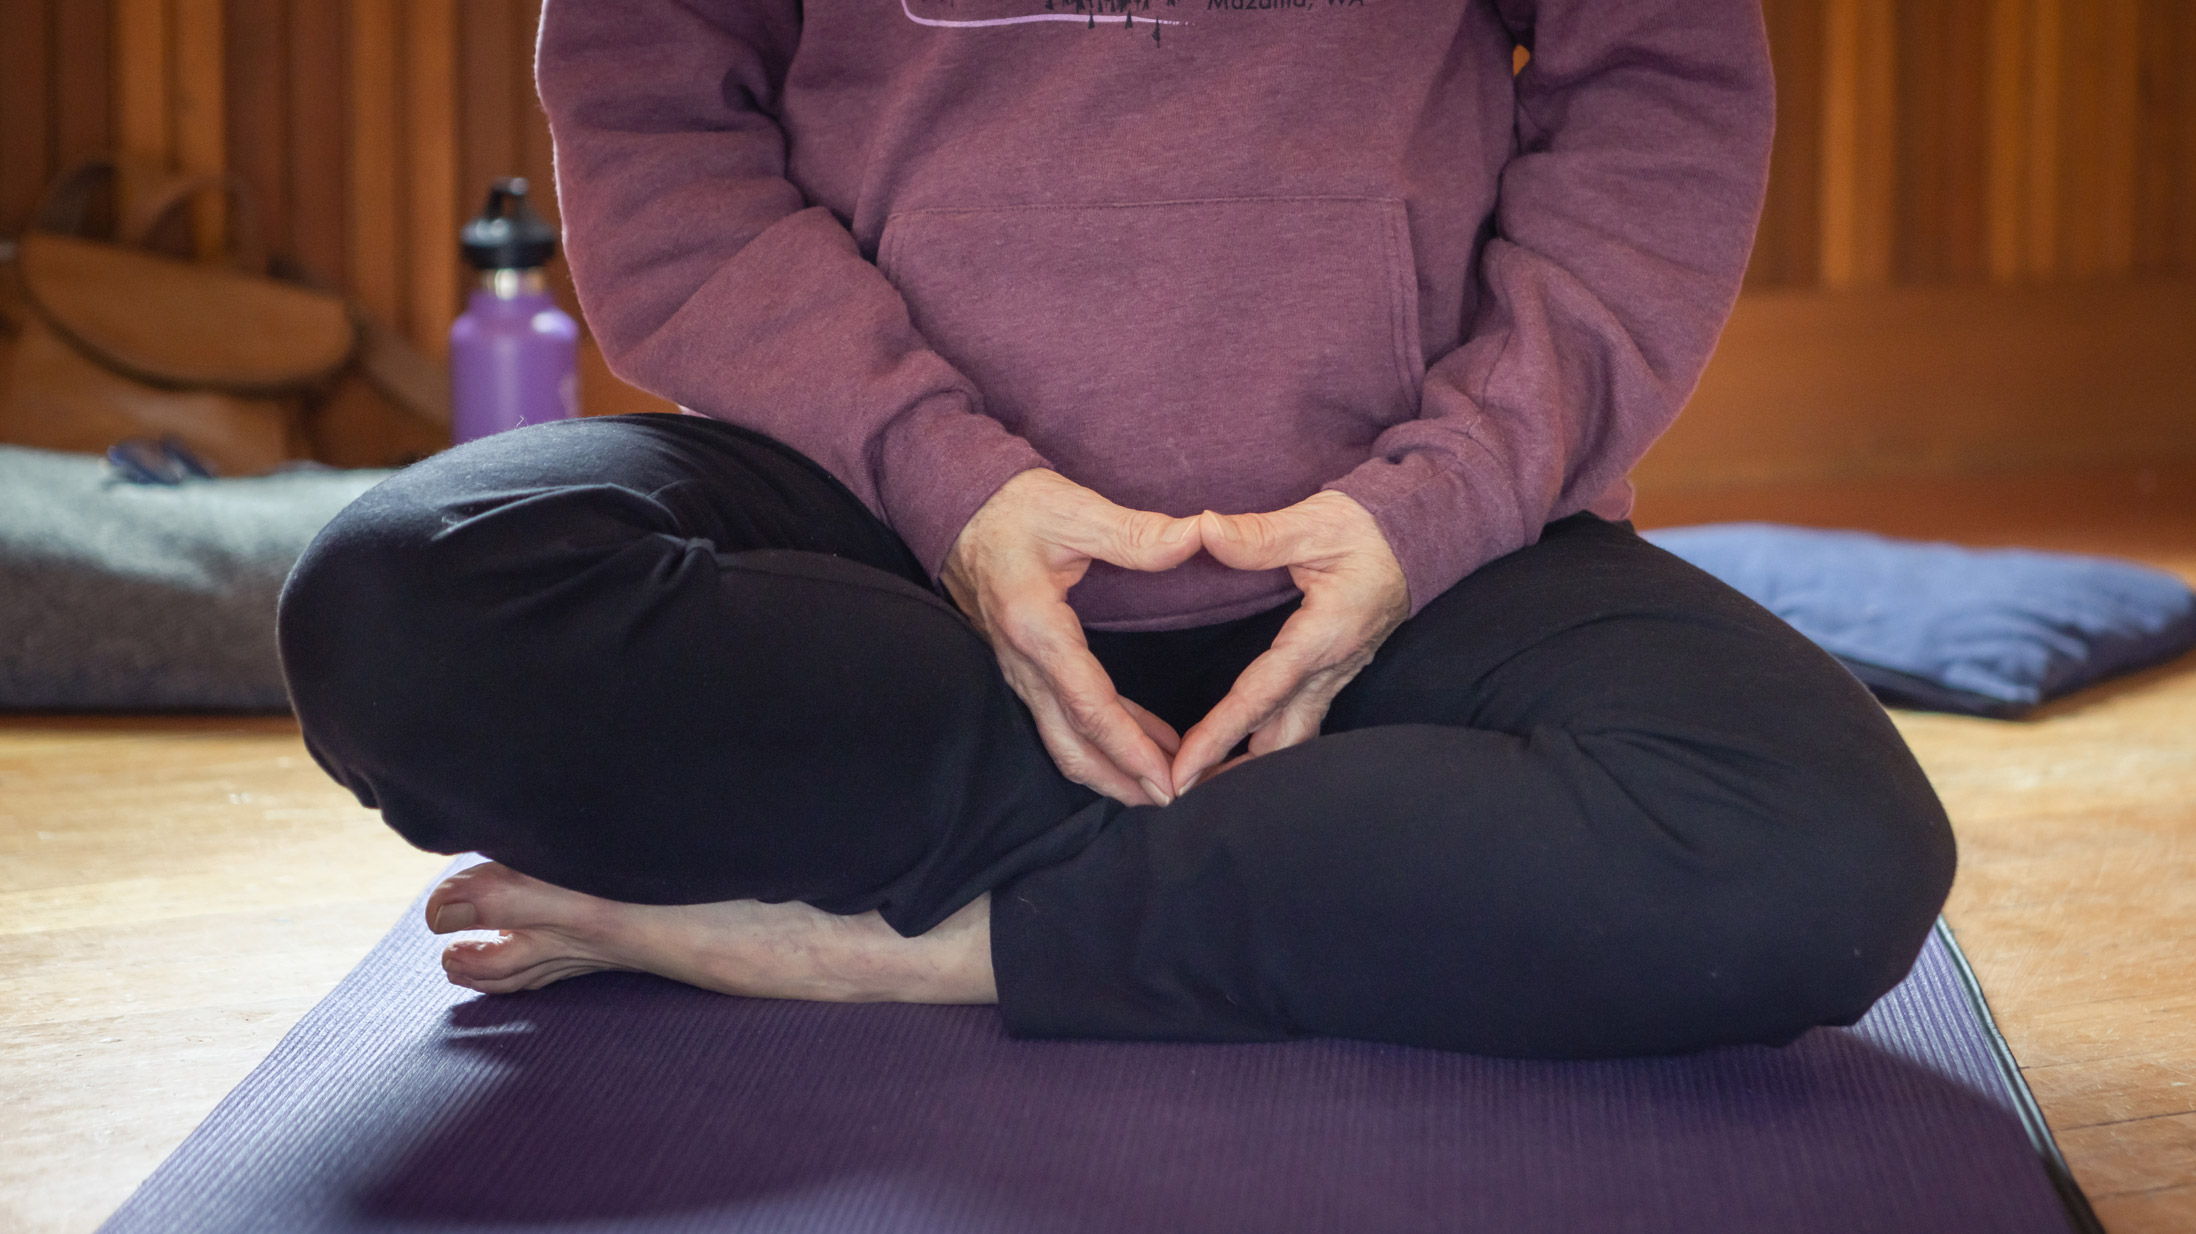 The crossed legs and balanced hands of a person sitting on a purple yoga mat.